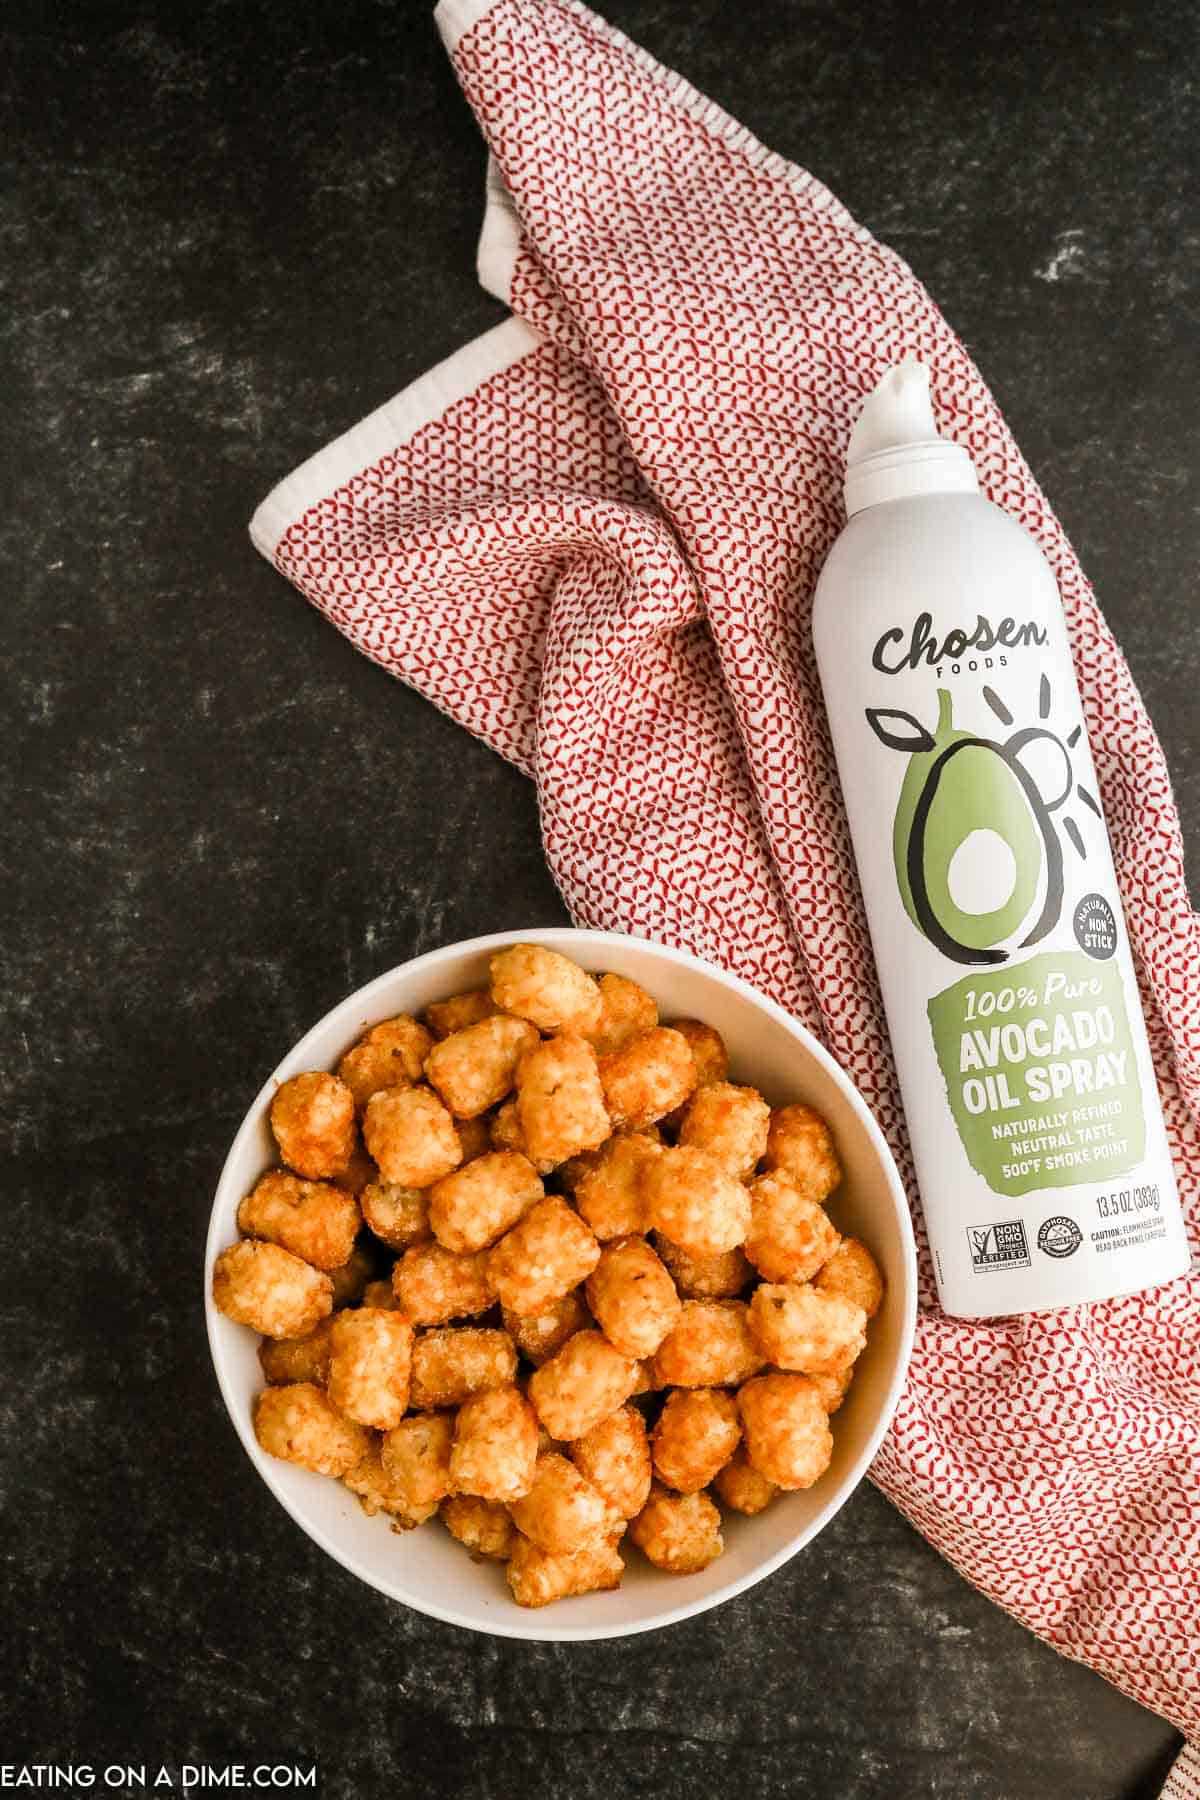 Tator Tots in a bowl with avocado spray on the side